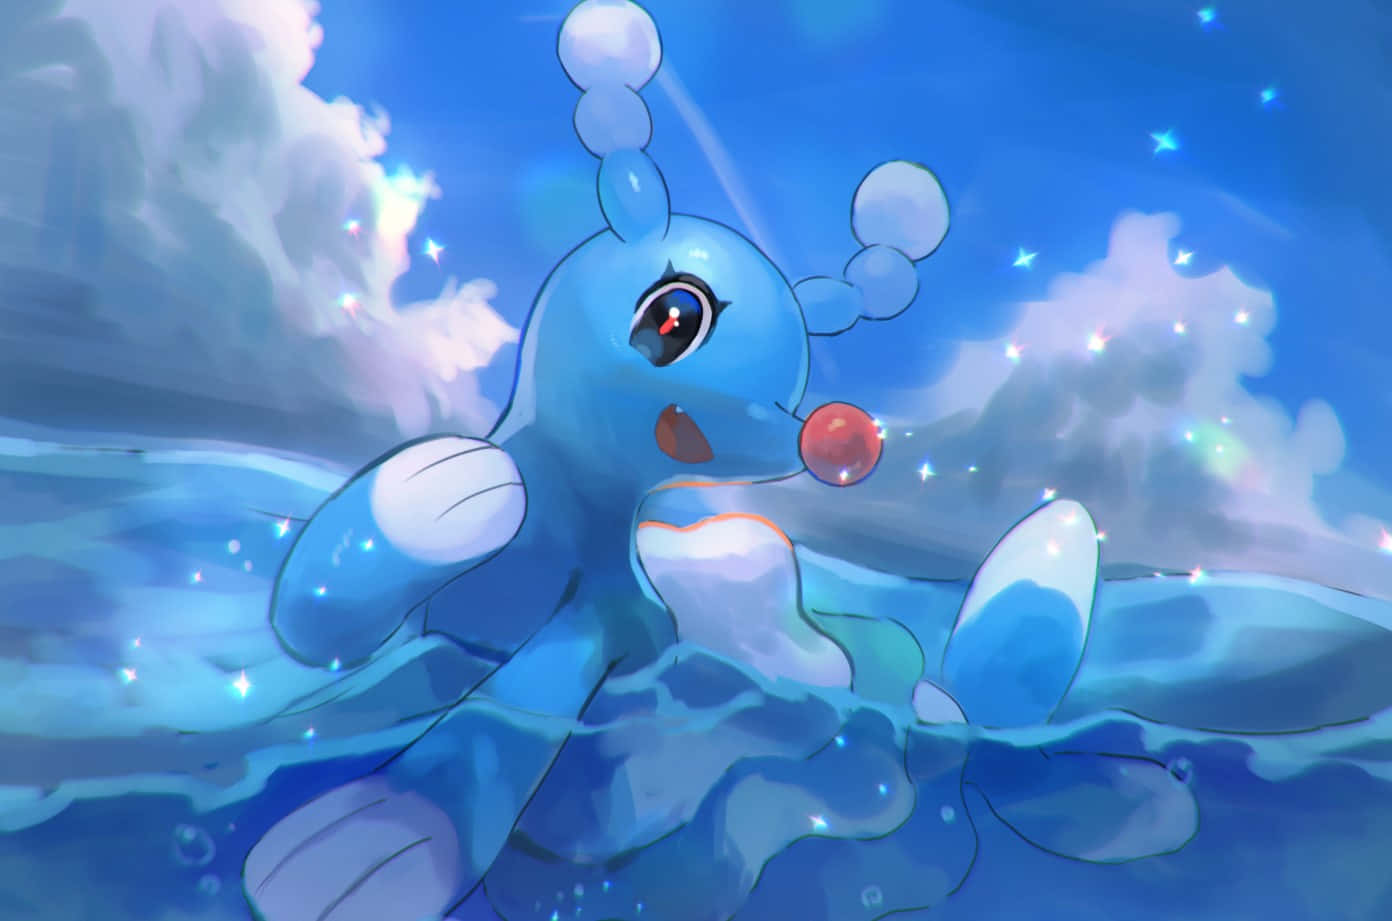 Take a dive into crystal-clear waters in Brionne. Wallpaper